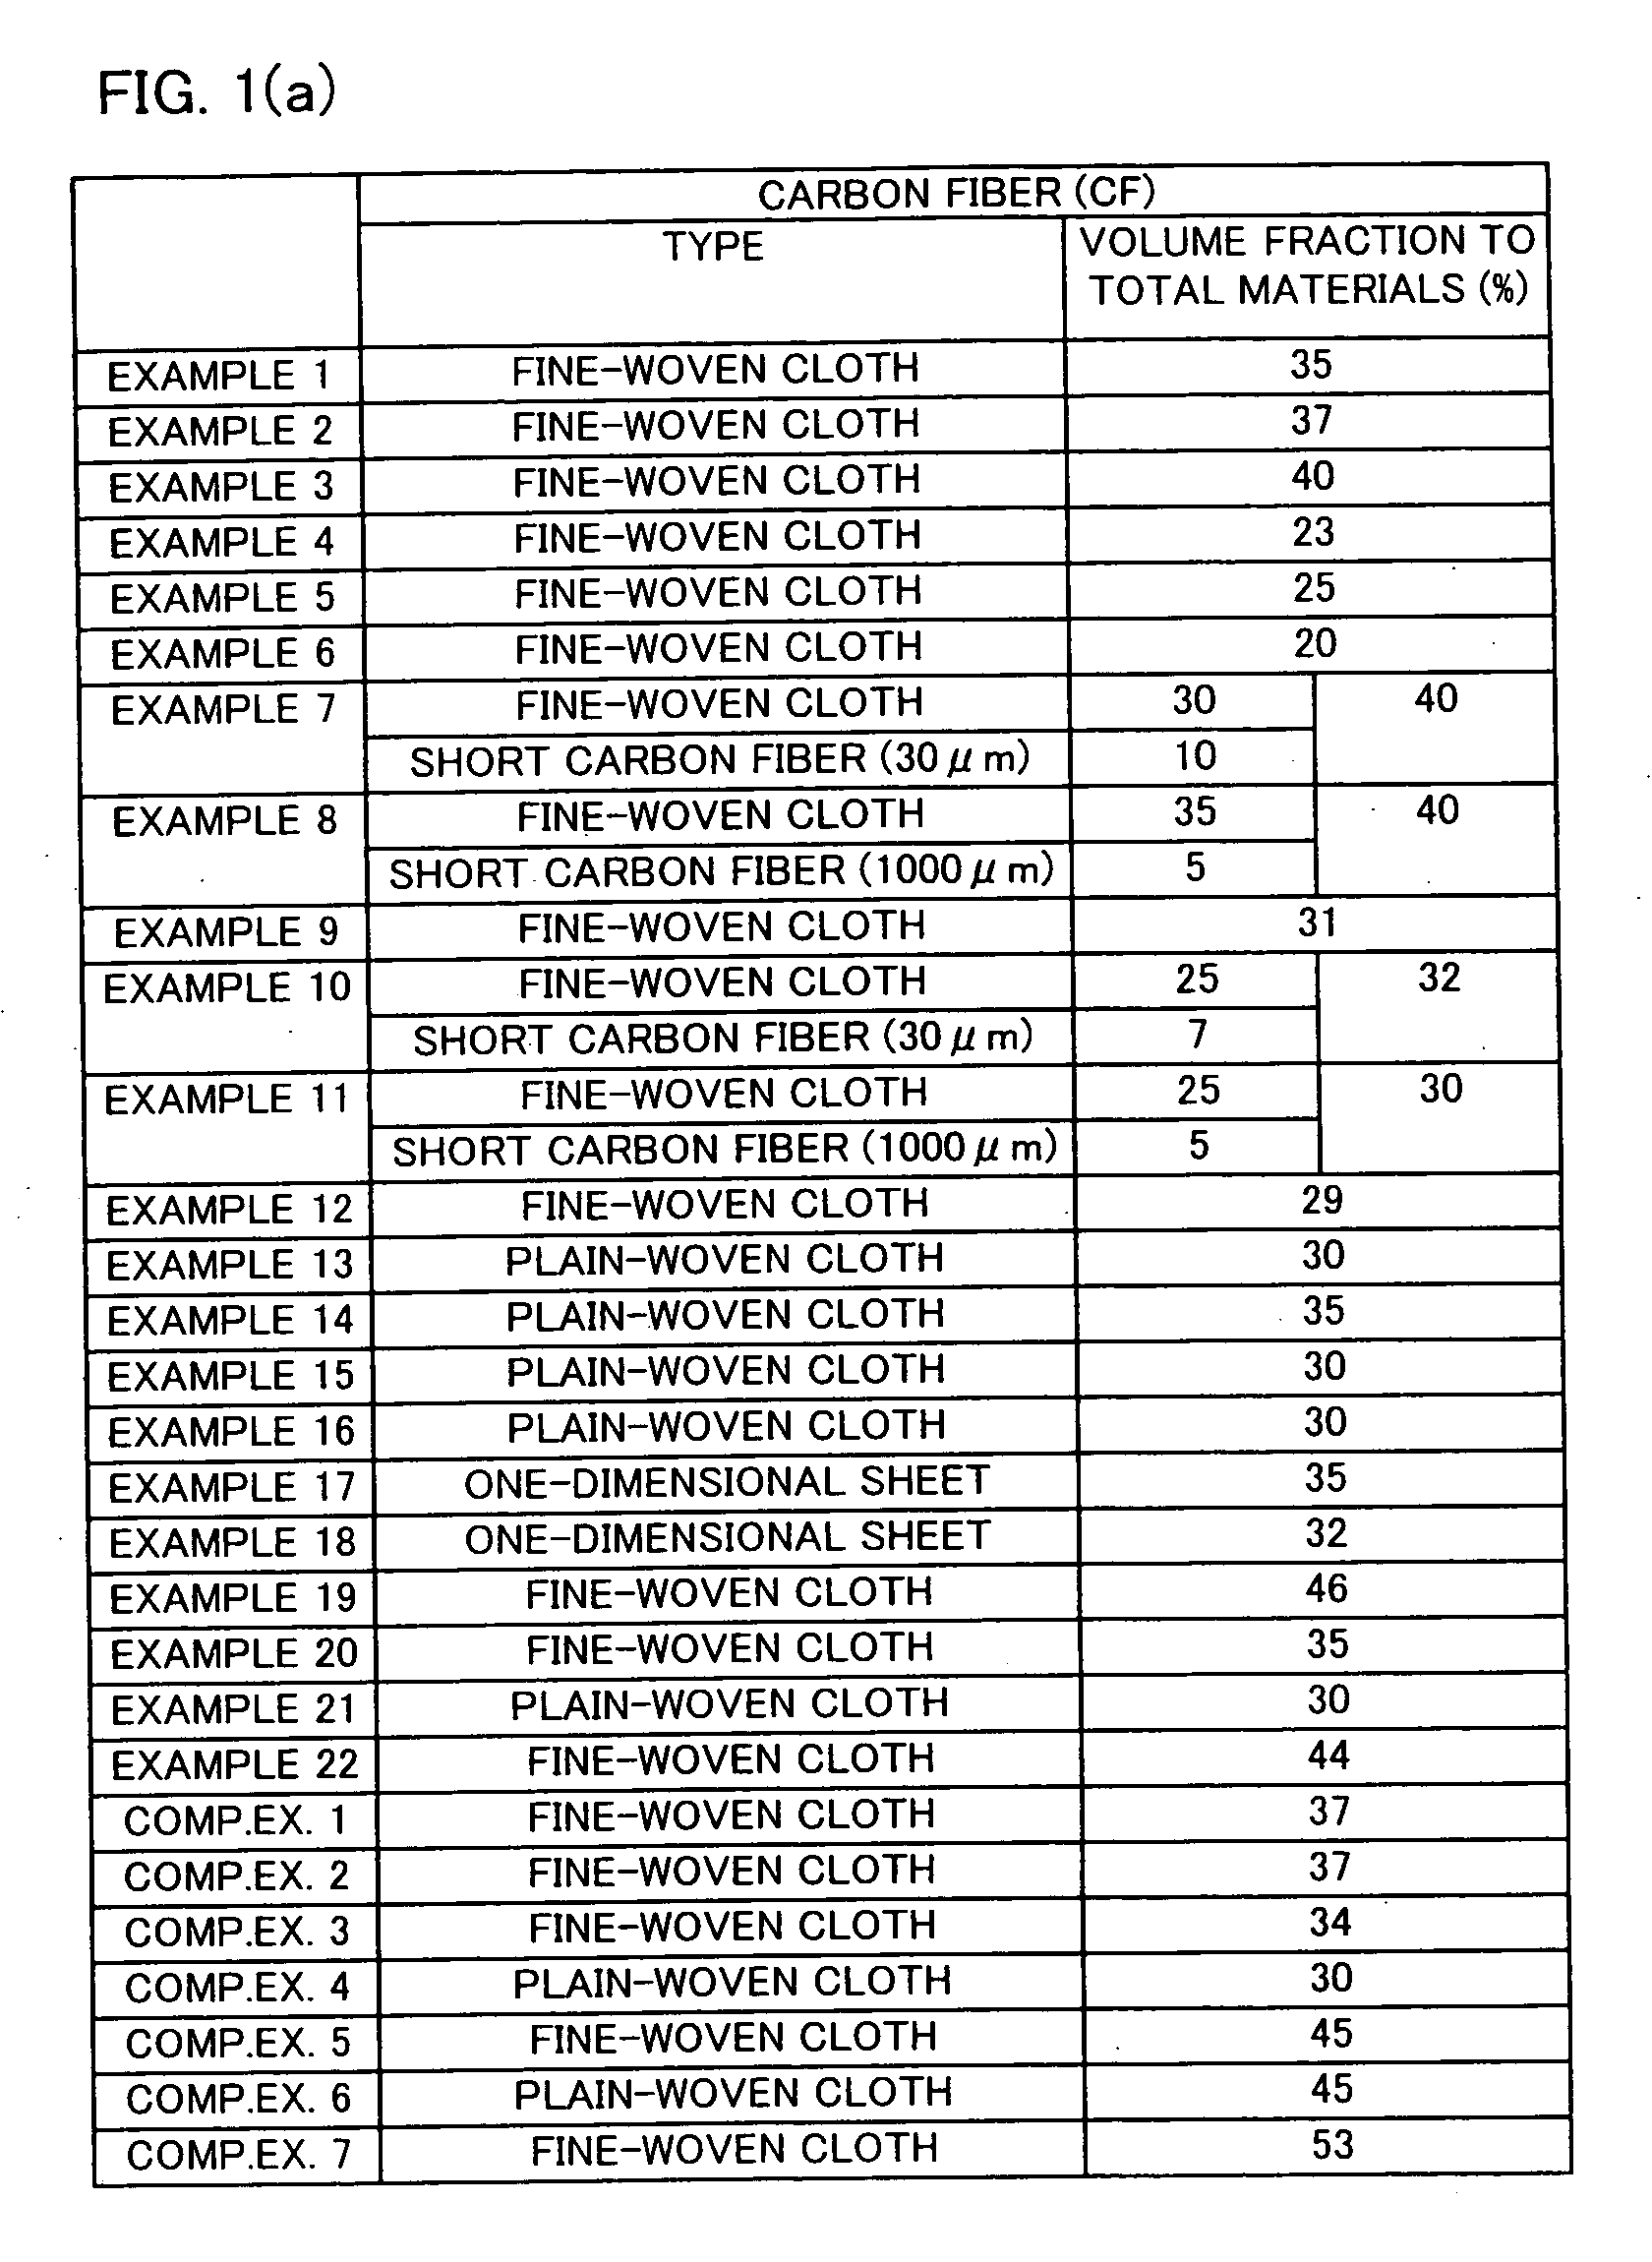 Oxidation resistant carbon fiber reinforced carbon composite material and process for producing the same